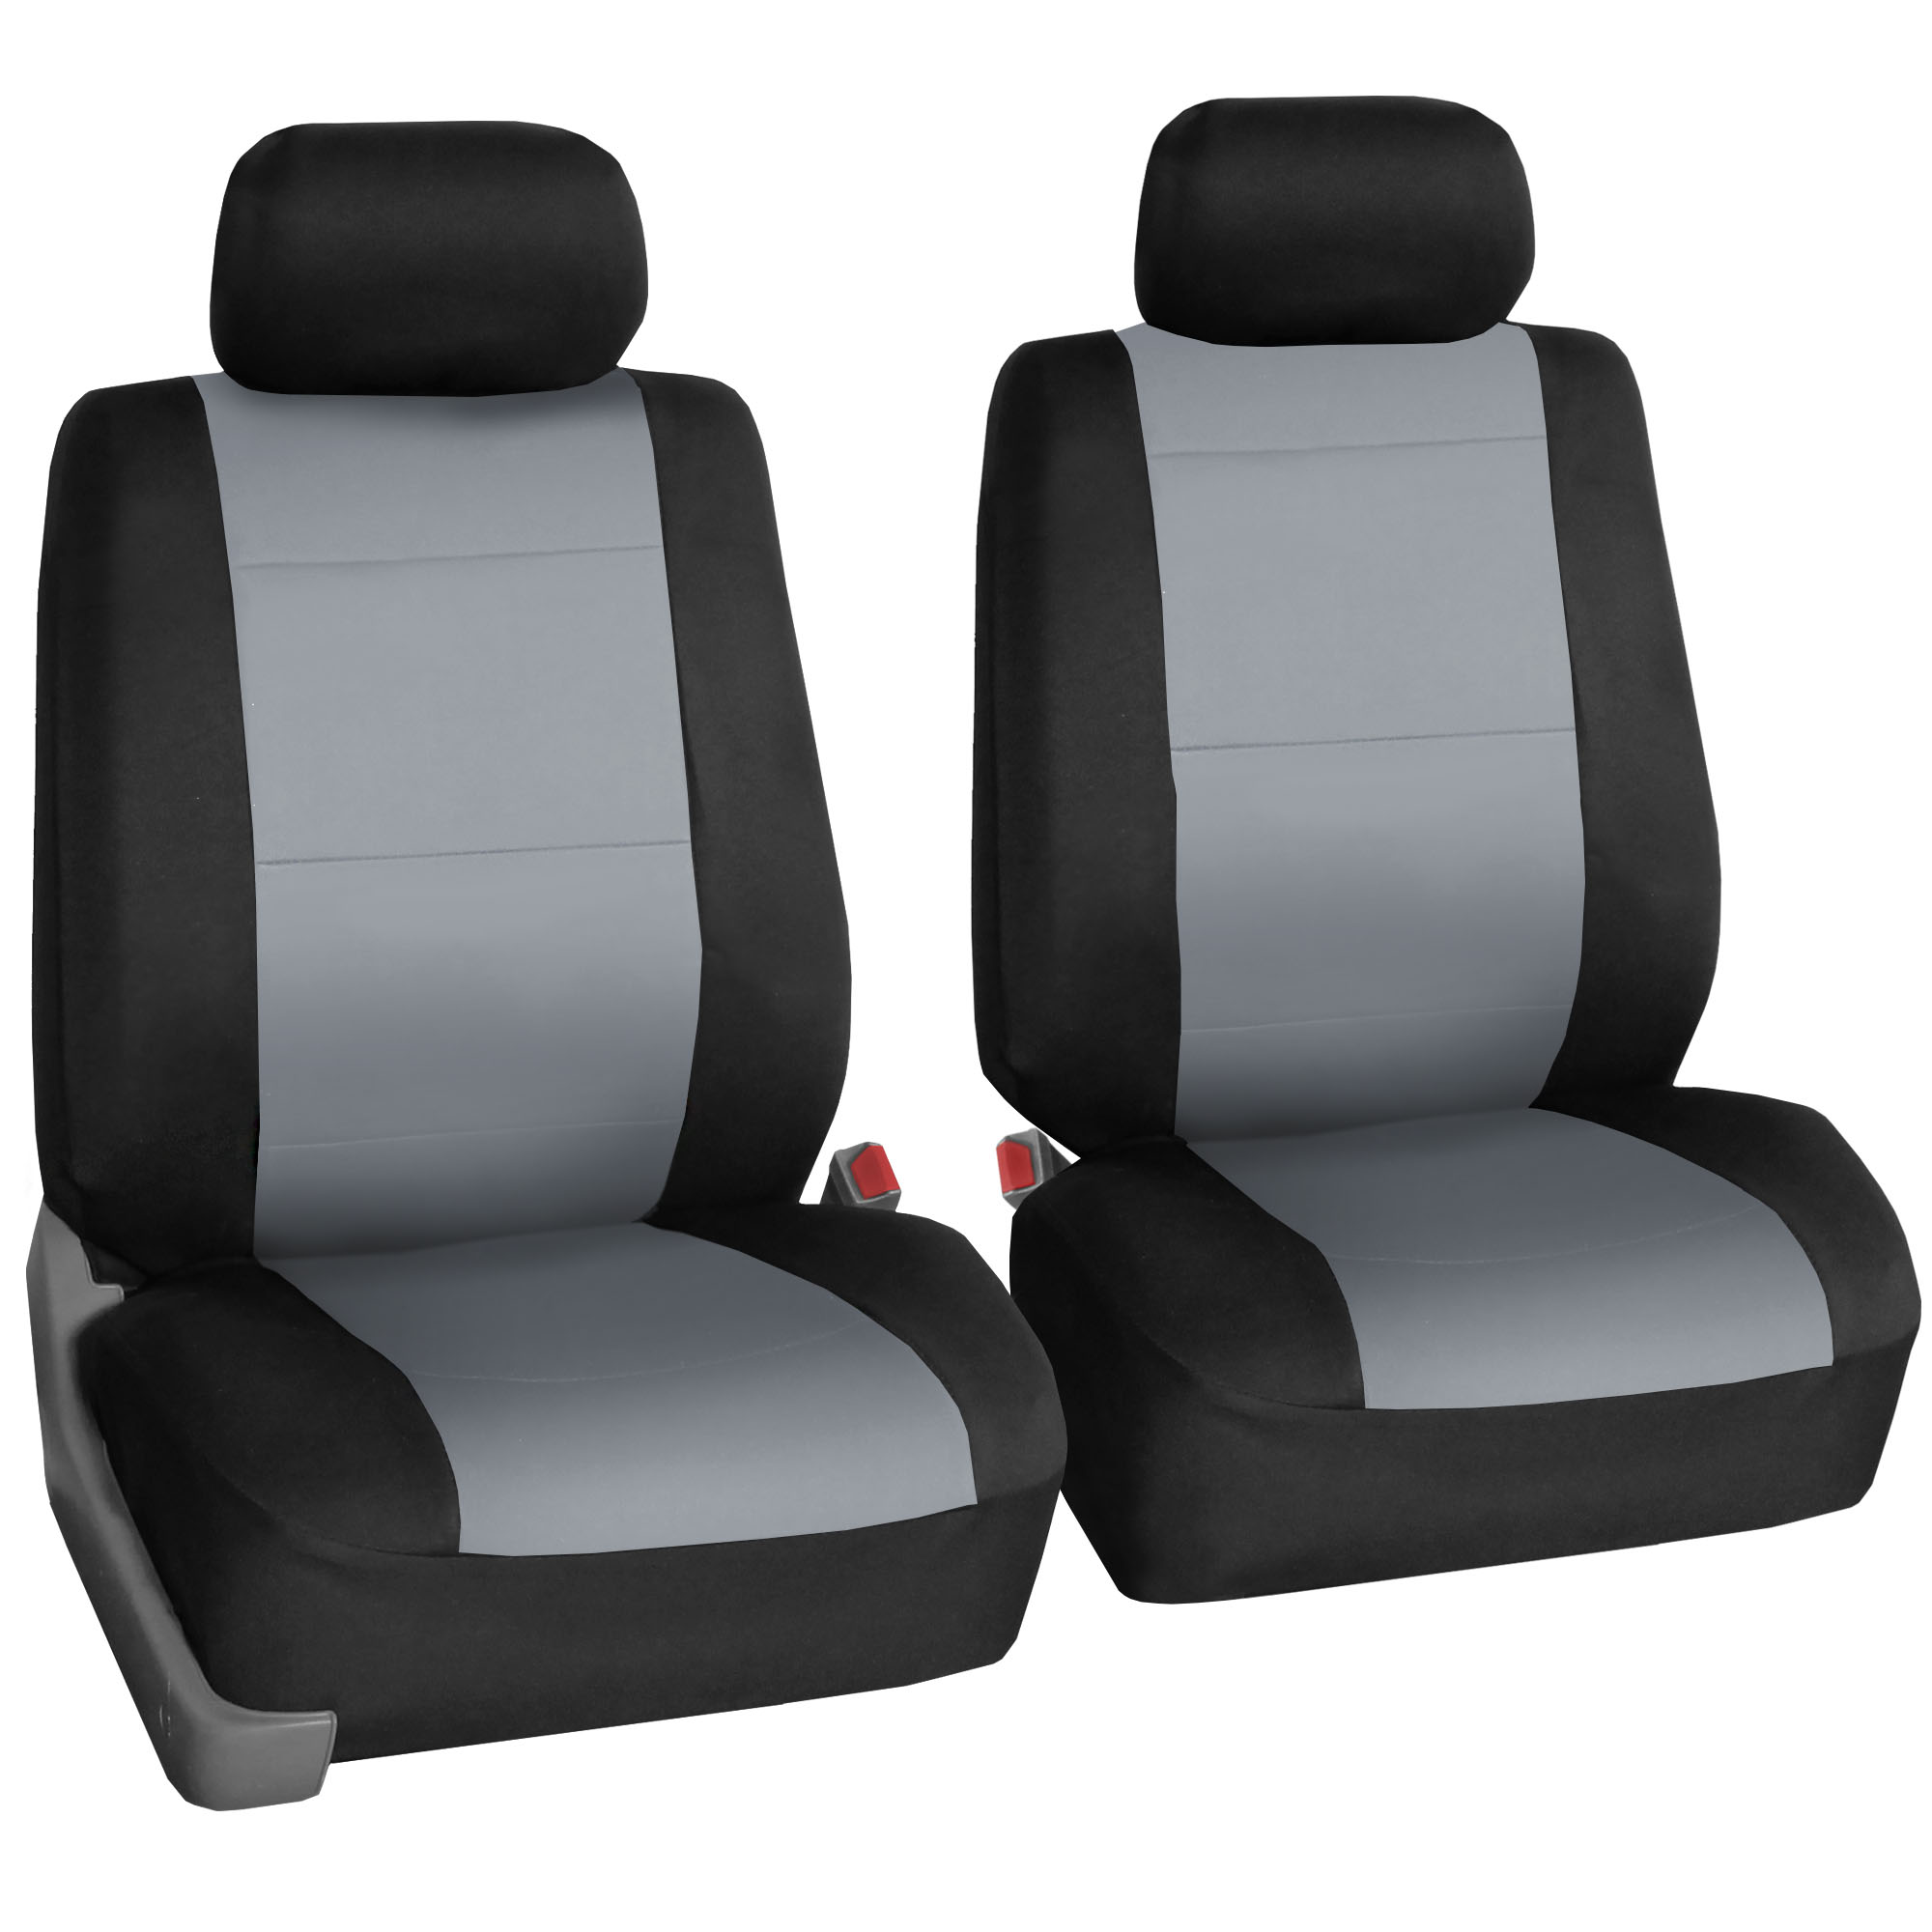 FH Group Neoprene Car Seat Cover Gray Black Combo w/ Black Floor Mats for Auto